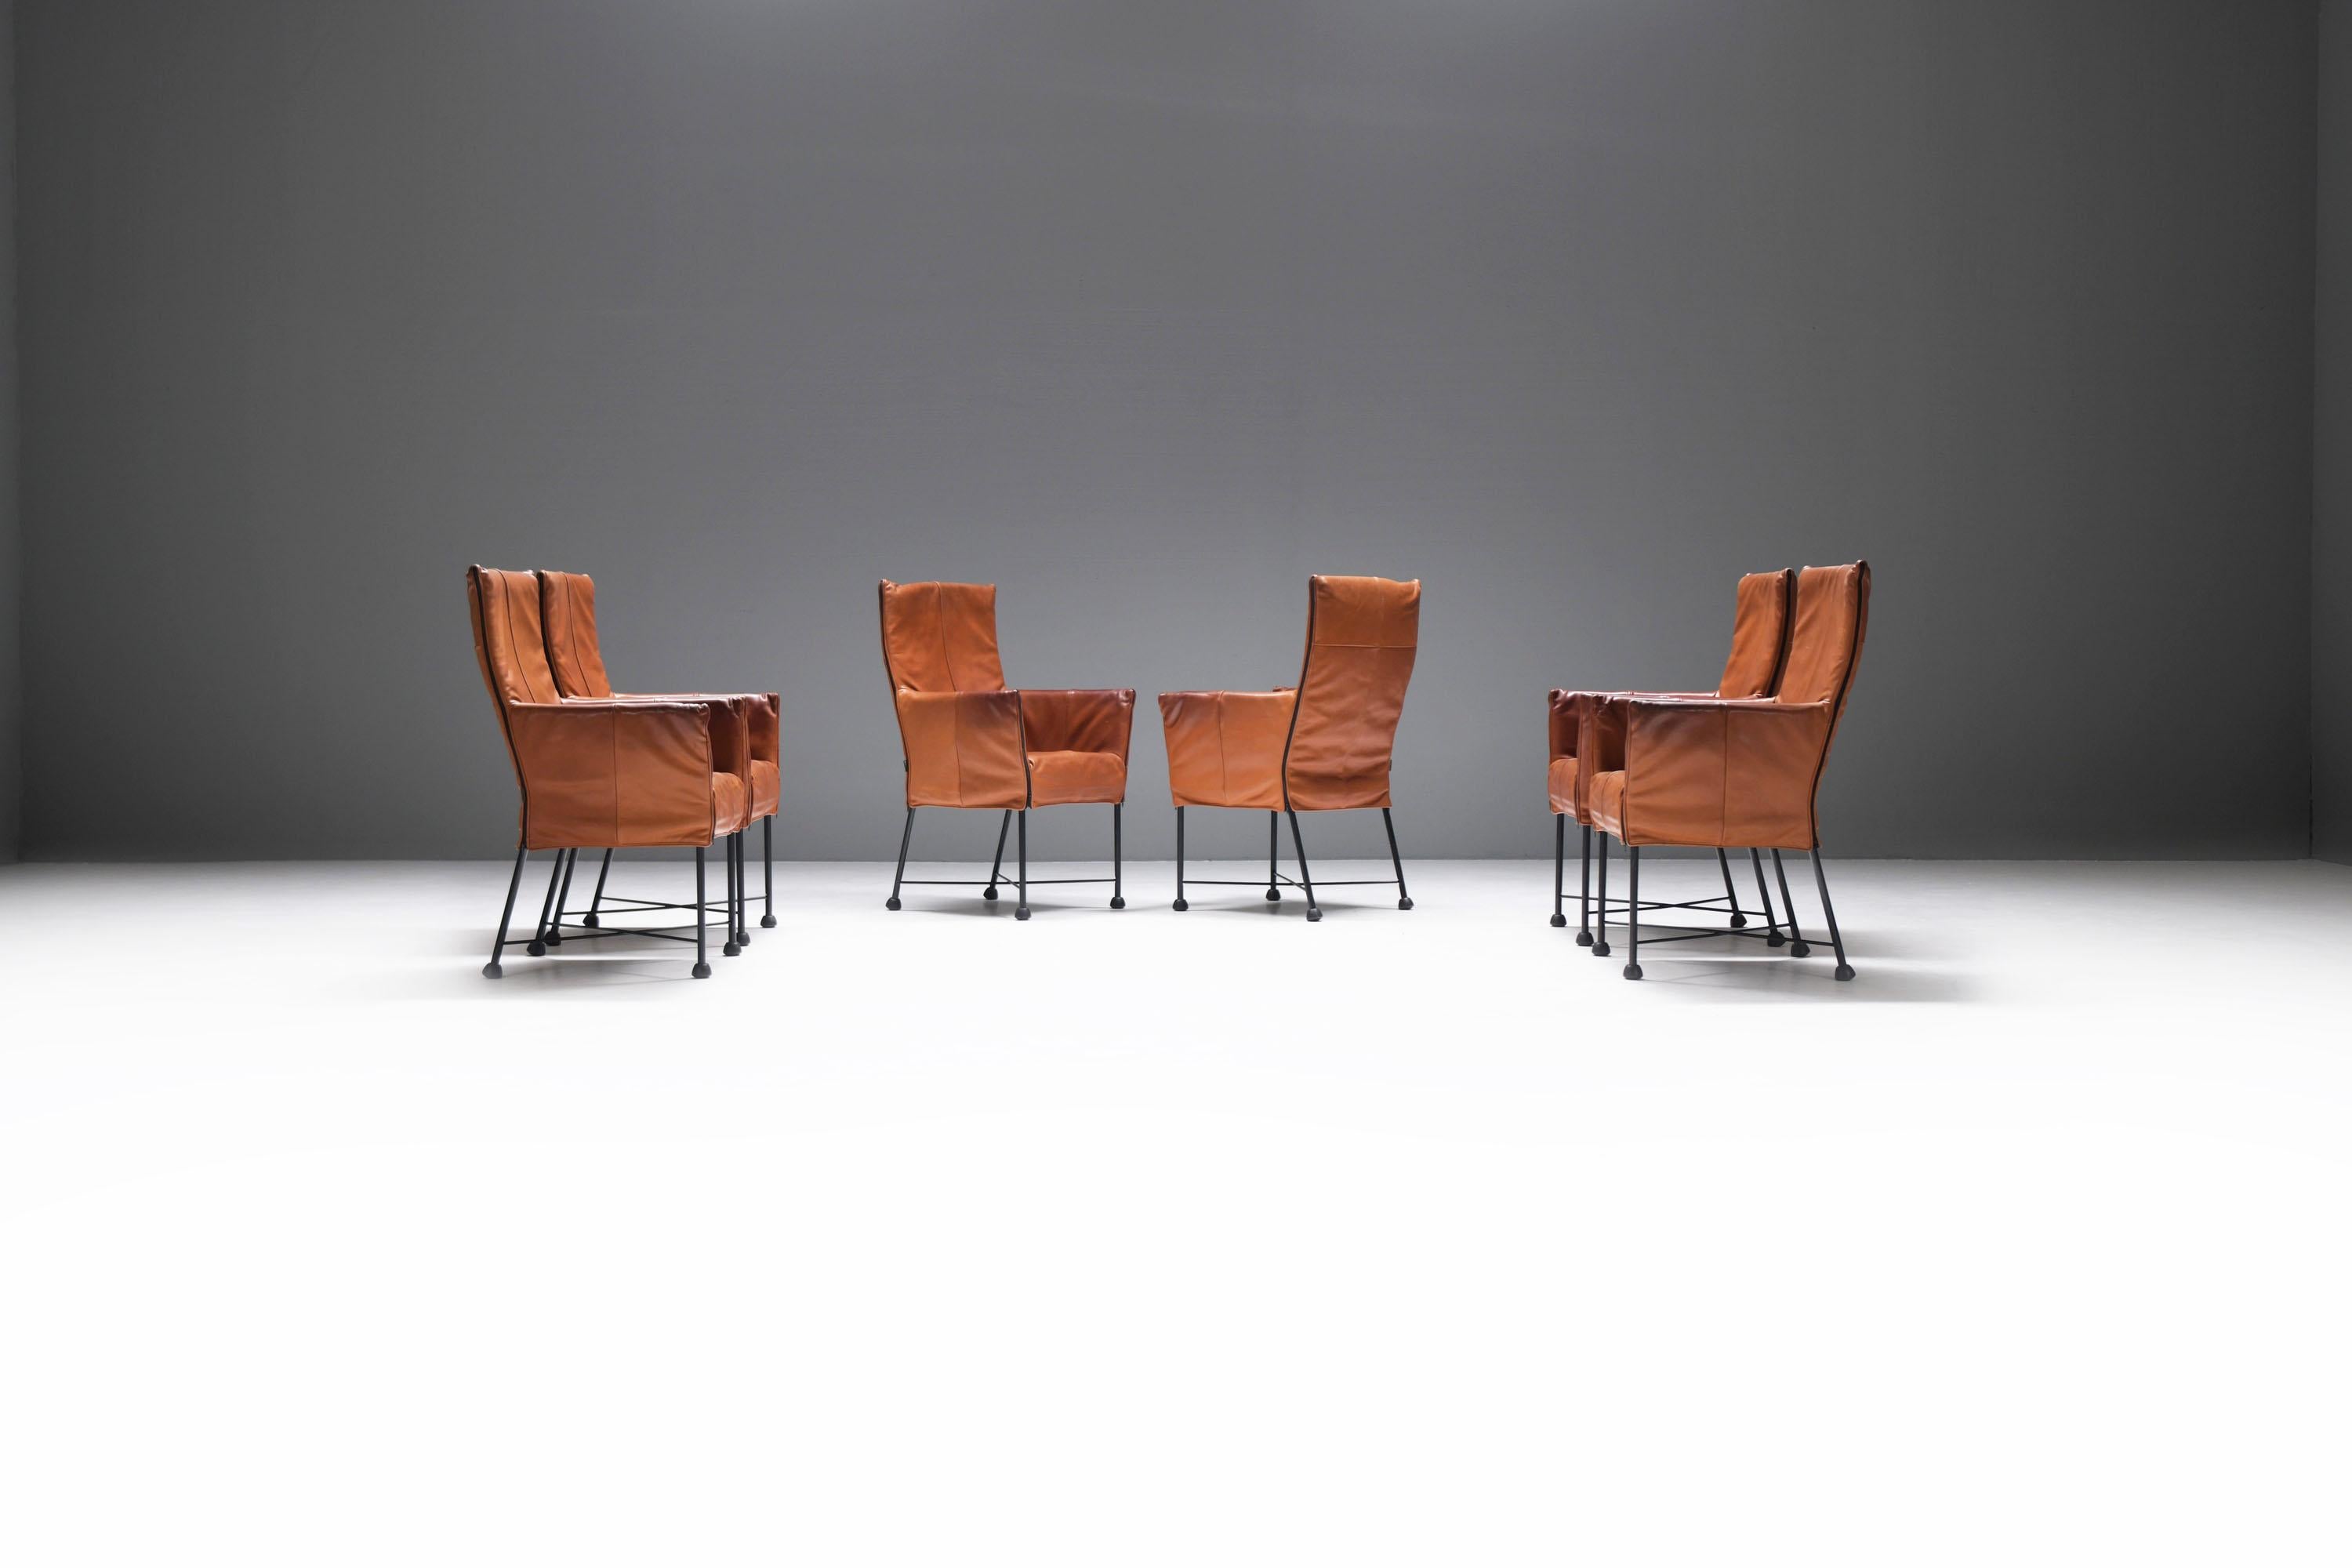 Exceptional set of 6 Chaplin dining armchairs.  Stunning patinated, thick leather.  Hard to find in this color.
Designed by Gerard van den Berg for Montis, the Netherlands (1983)

The leather cover hangs nonchalantly on the chair like a padded